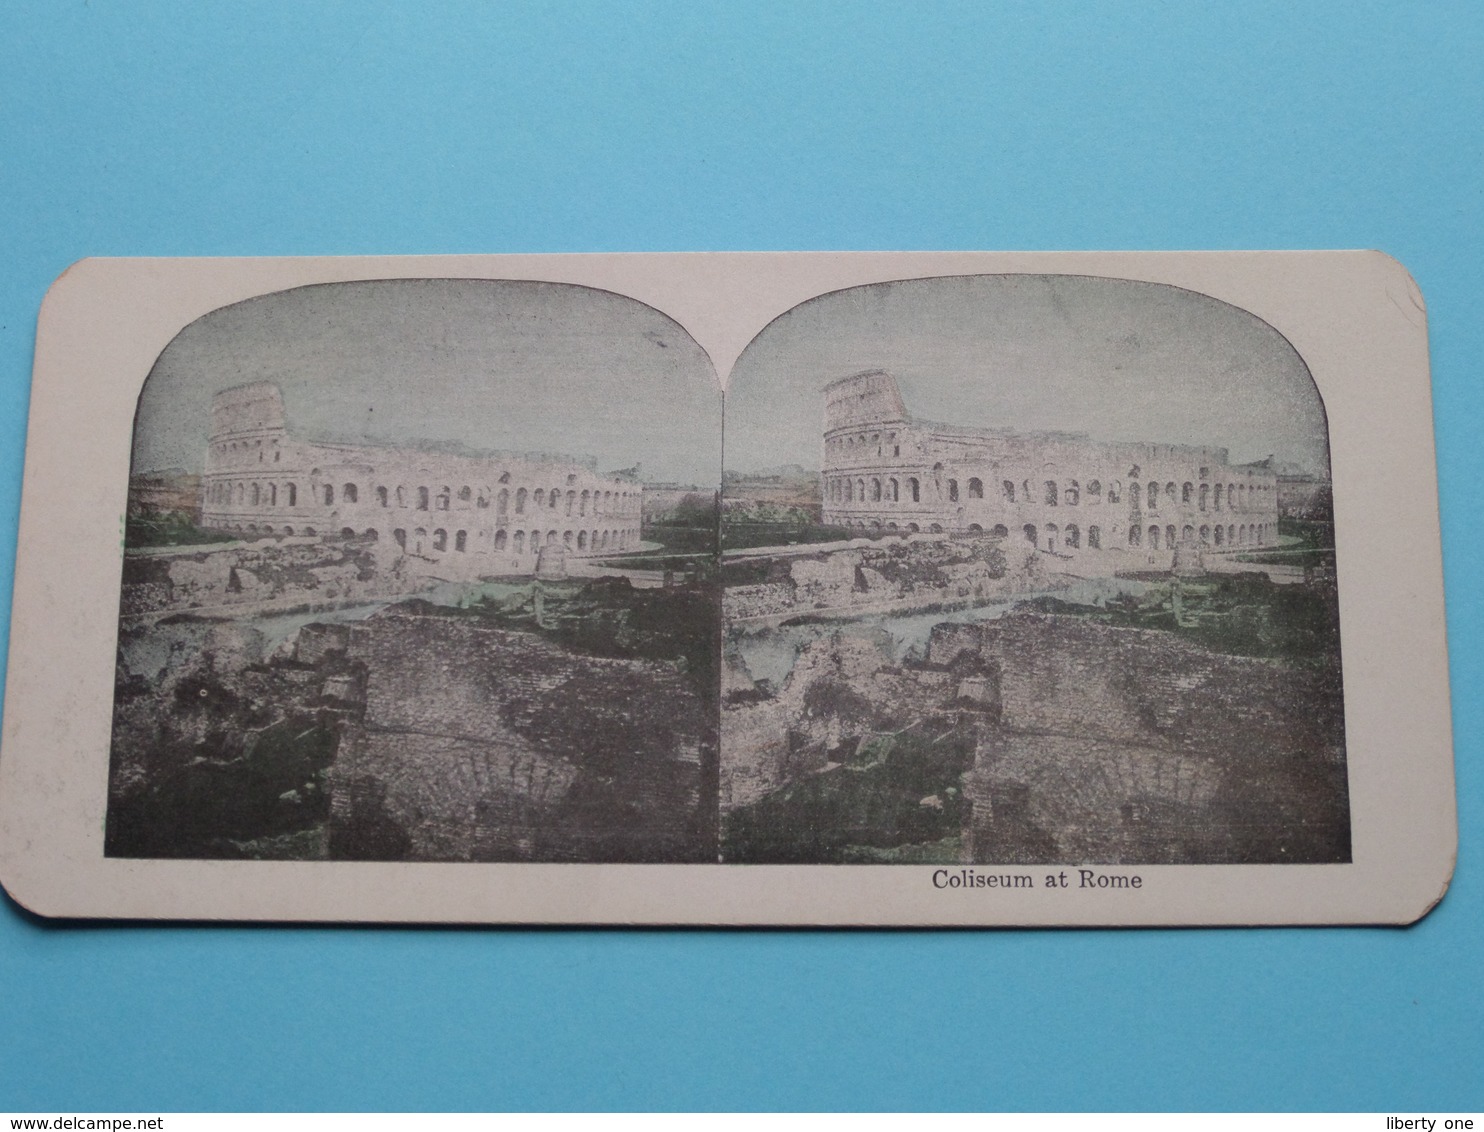 25 Views Copyrighted STEREOGRAPHS ( in this Lot is 1 Photo Missing ) Made from the Original Negatives !